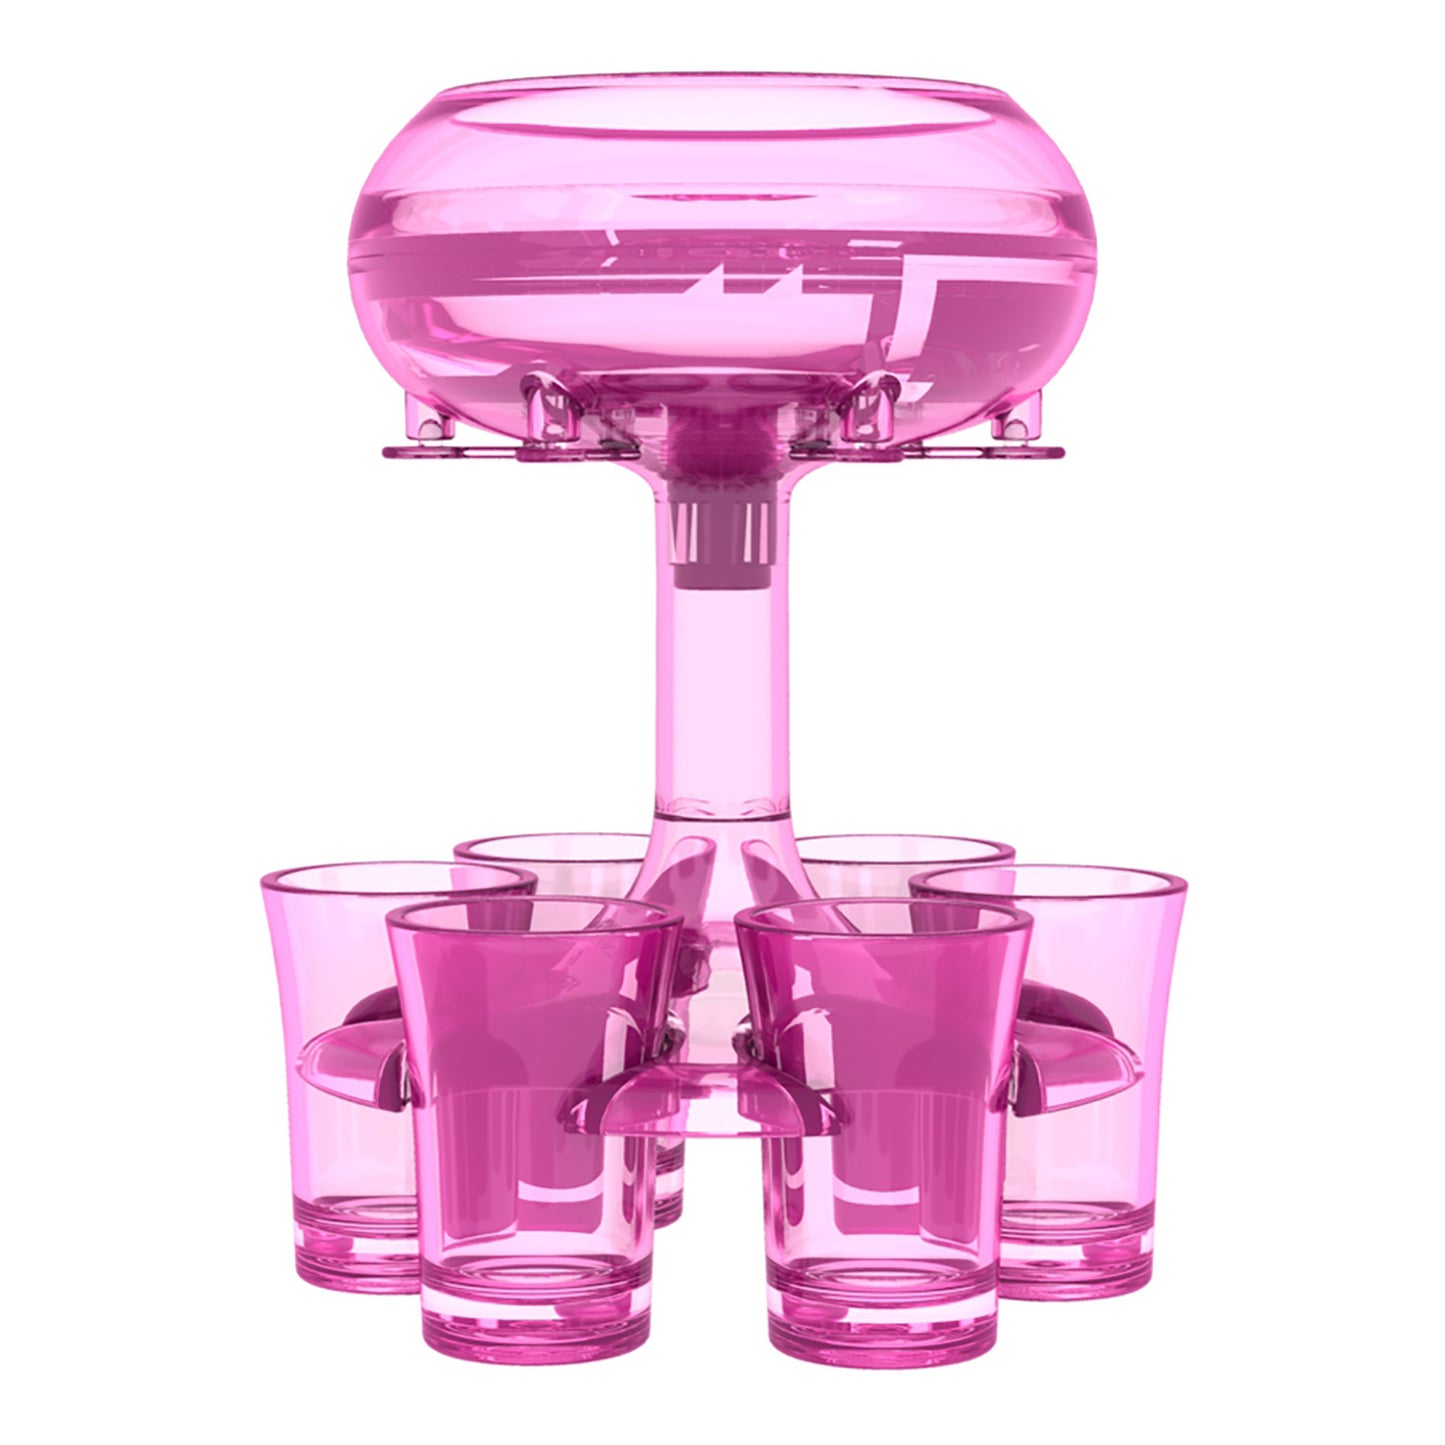 6-Shot Glass Dispenser, perfect for  Party Games